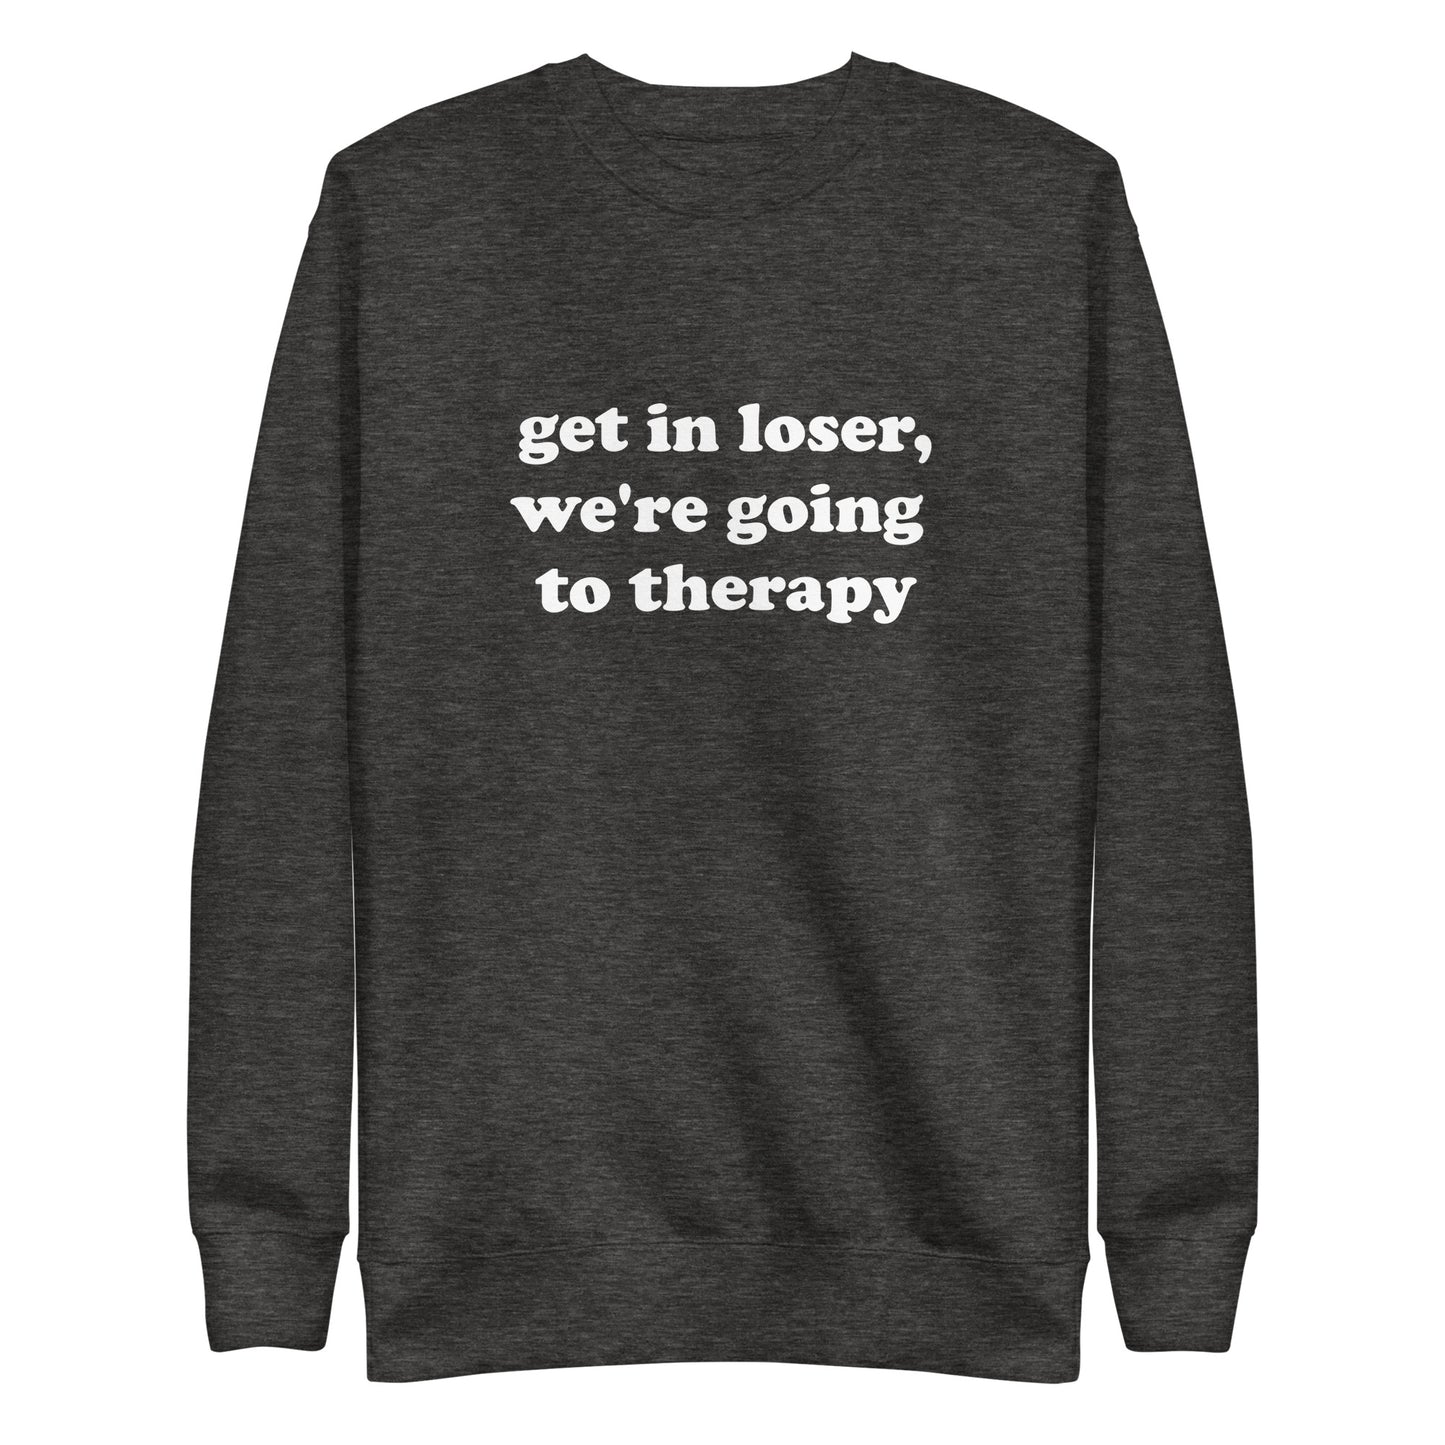 Get In Loser, We're Going to Therapy Sweatshirt